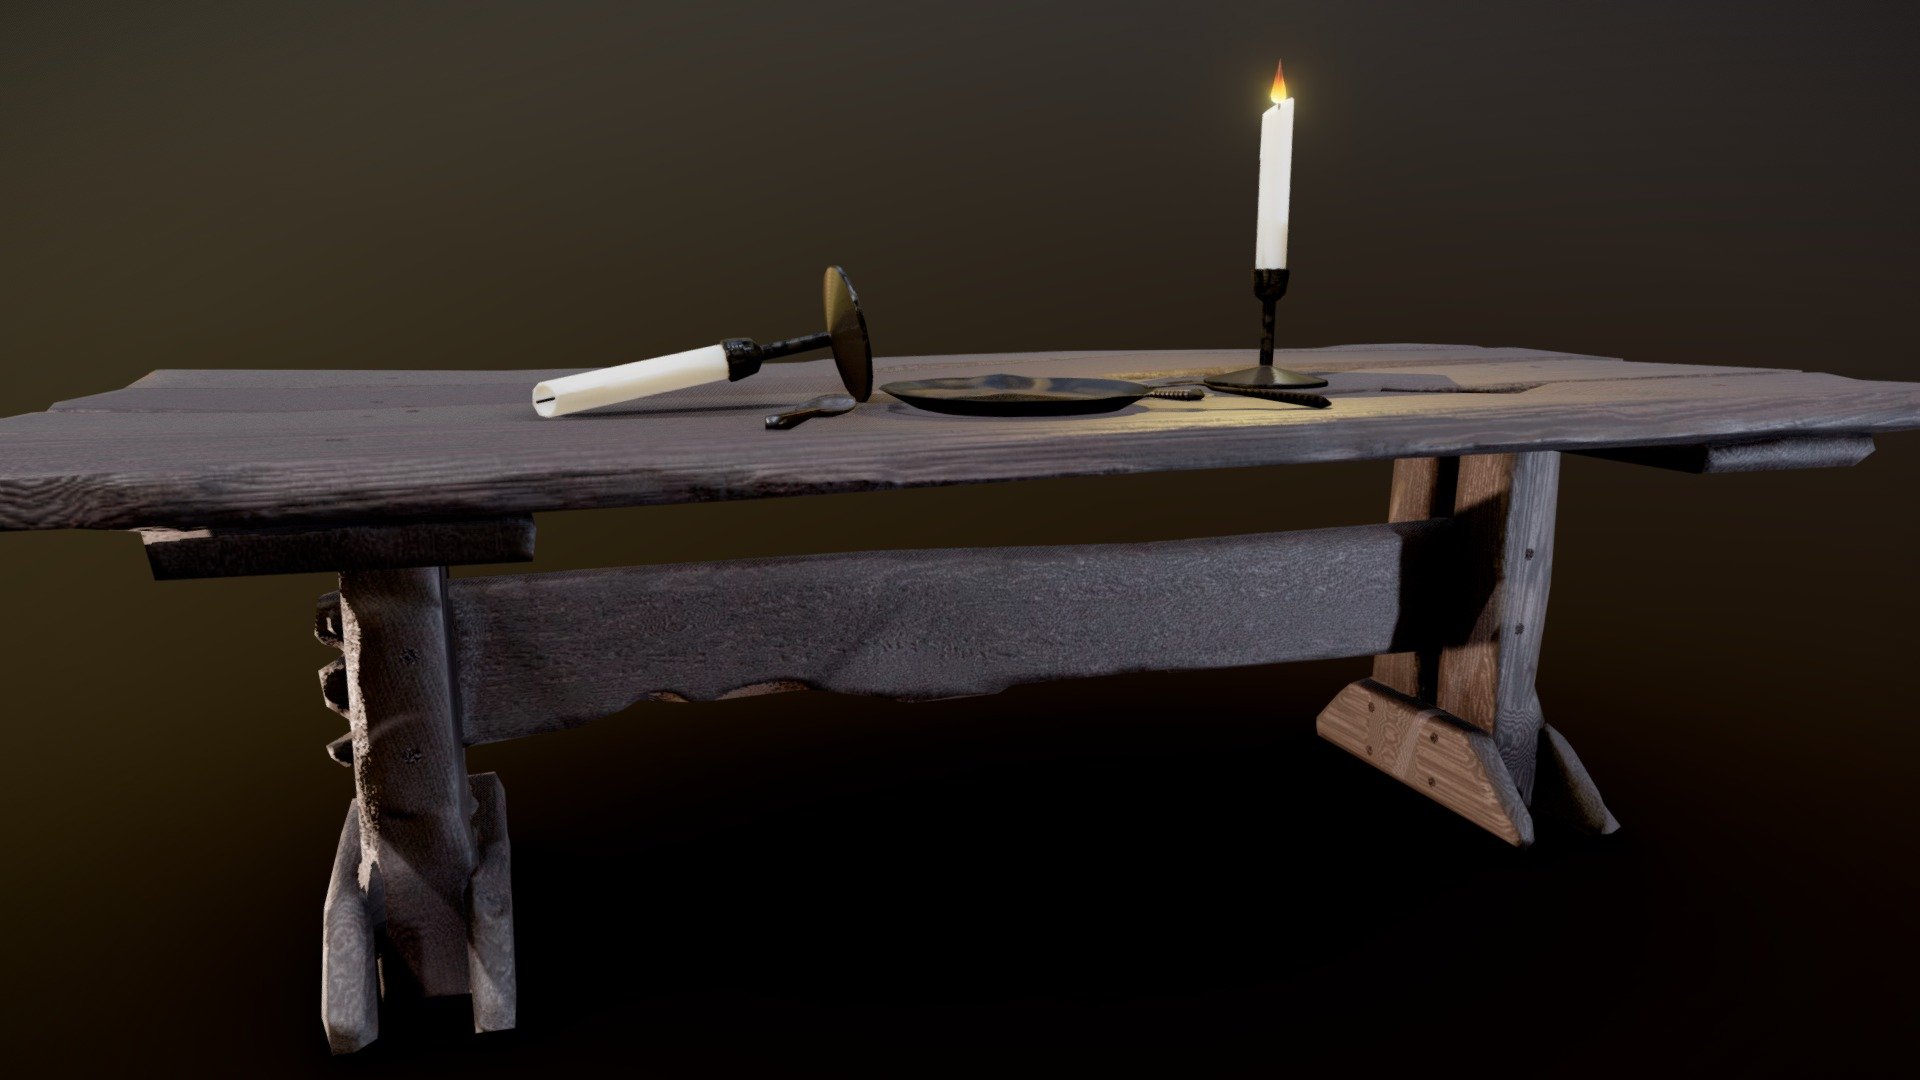 The goal here was to create a small scene in a medieval theme.
Relatively low on geometry detail, all PBR materials with detail baked from high-poly models 3d model